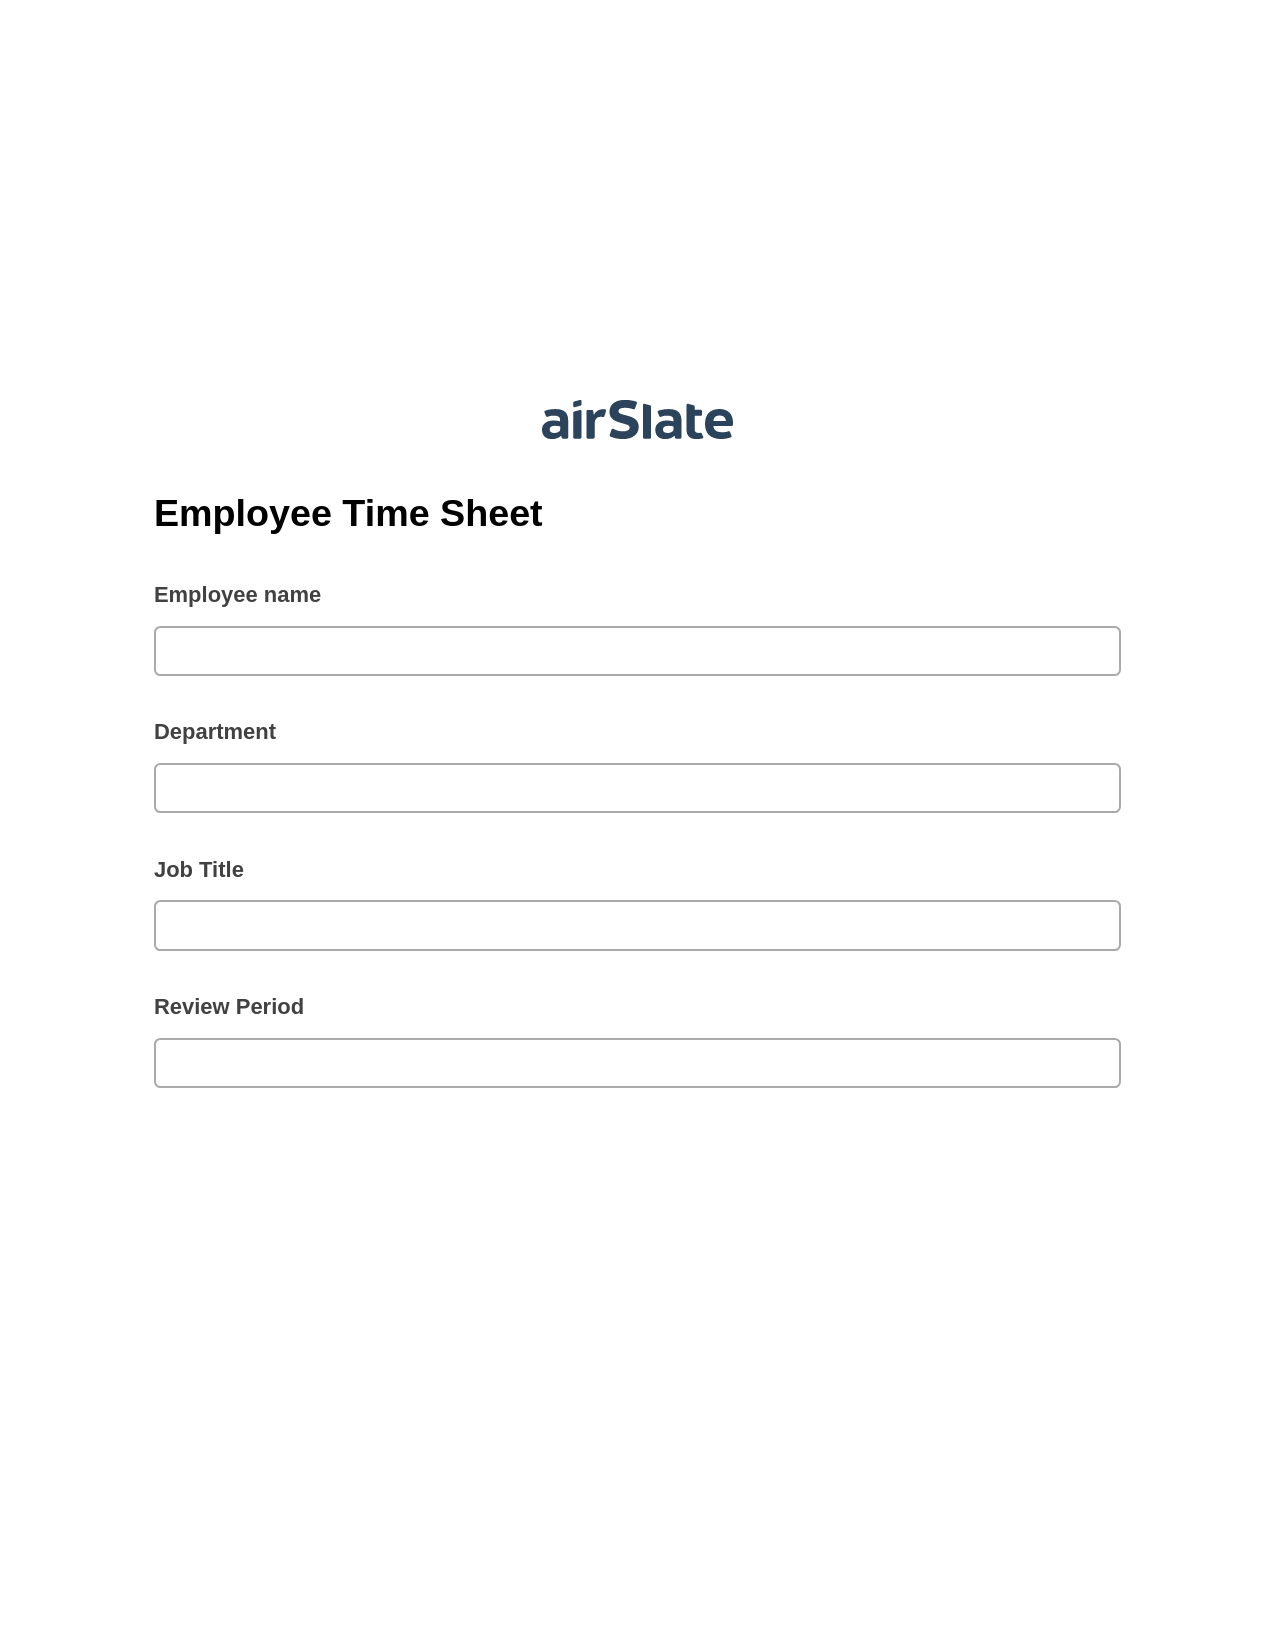 Employee Time Sheet Prefill from NetSuite records, Send a Slate with Roles Bot, Archive to Dropbox Bot